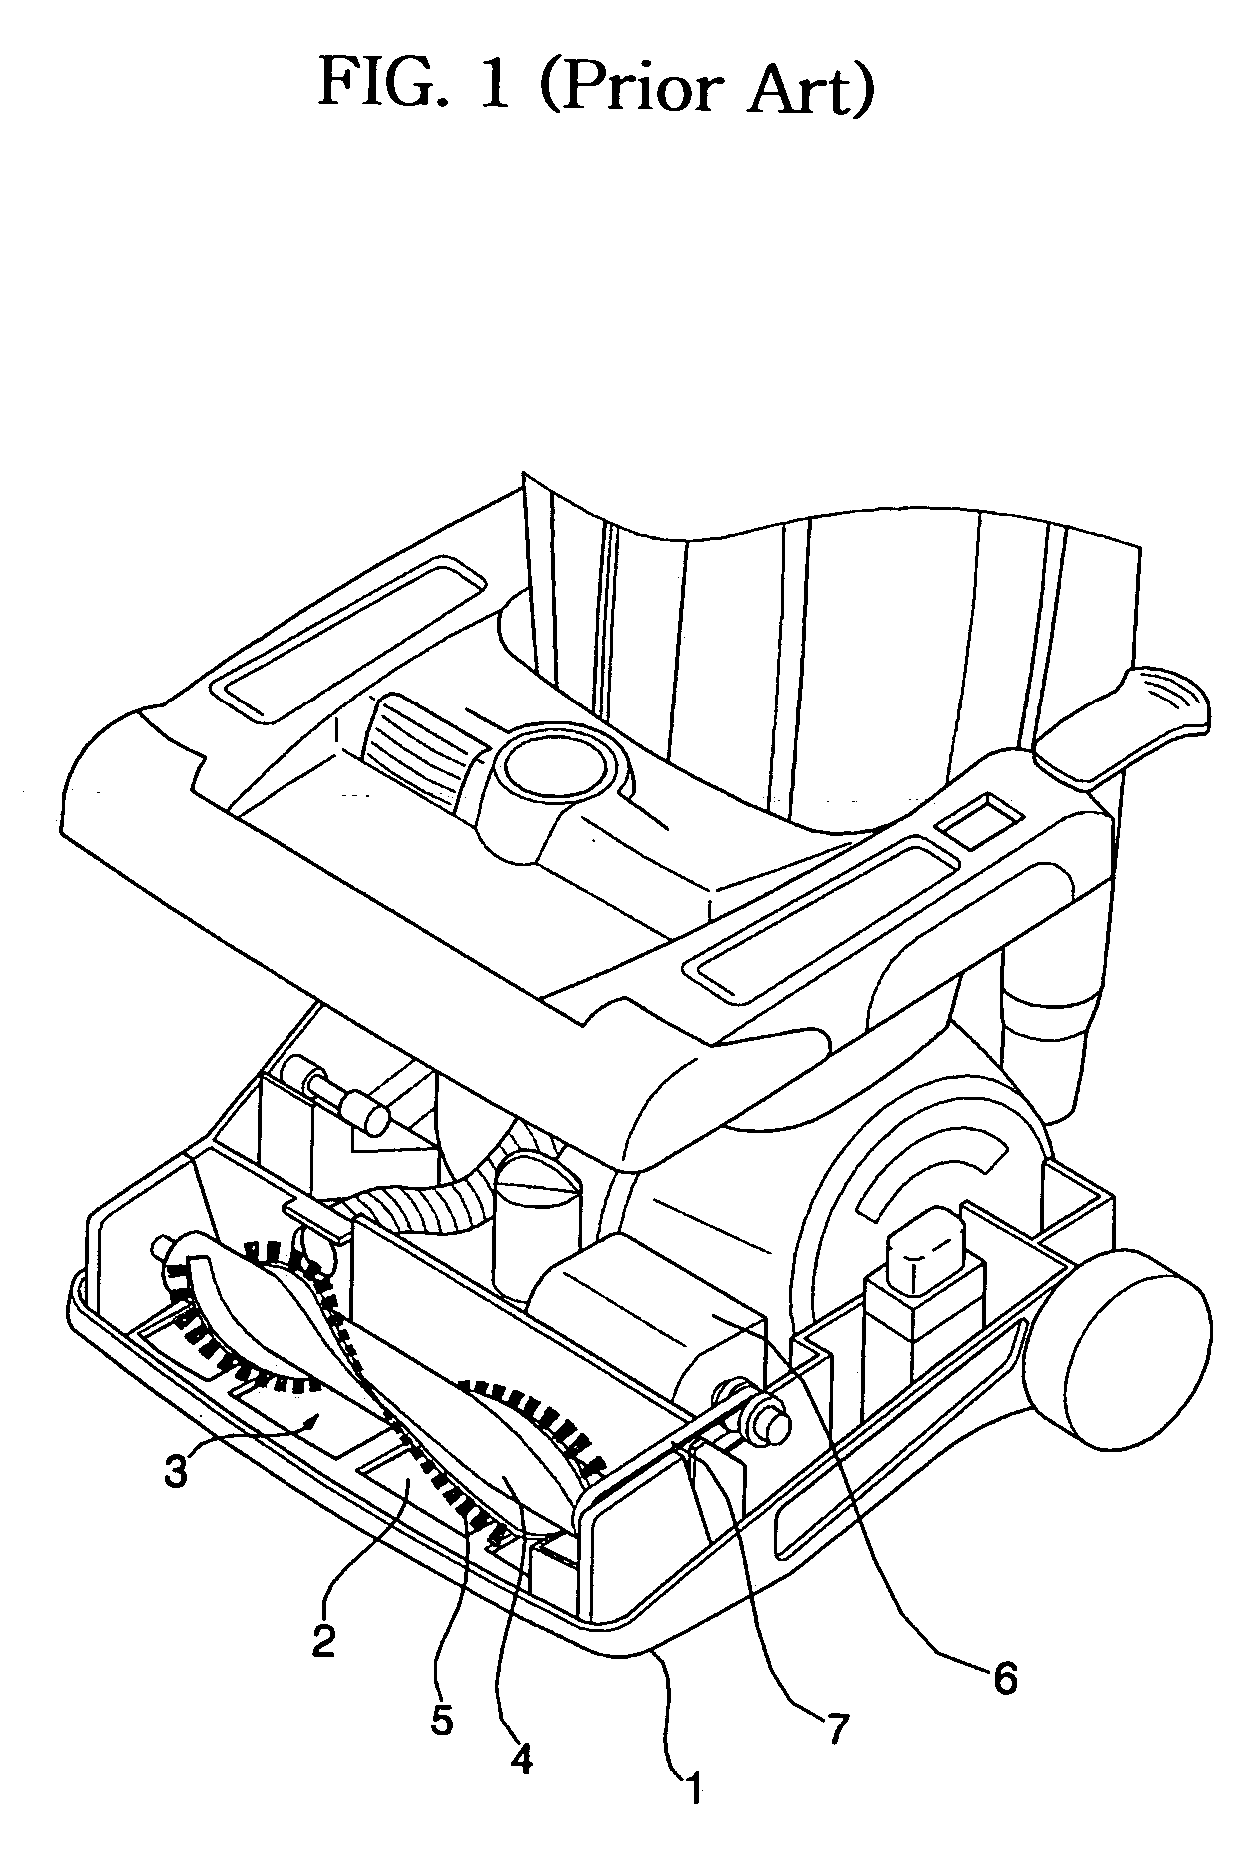 Method for determining frequency of power brush in vacuum cleaner